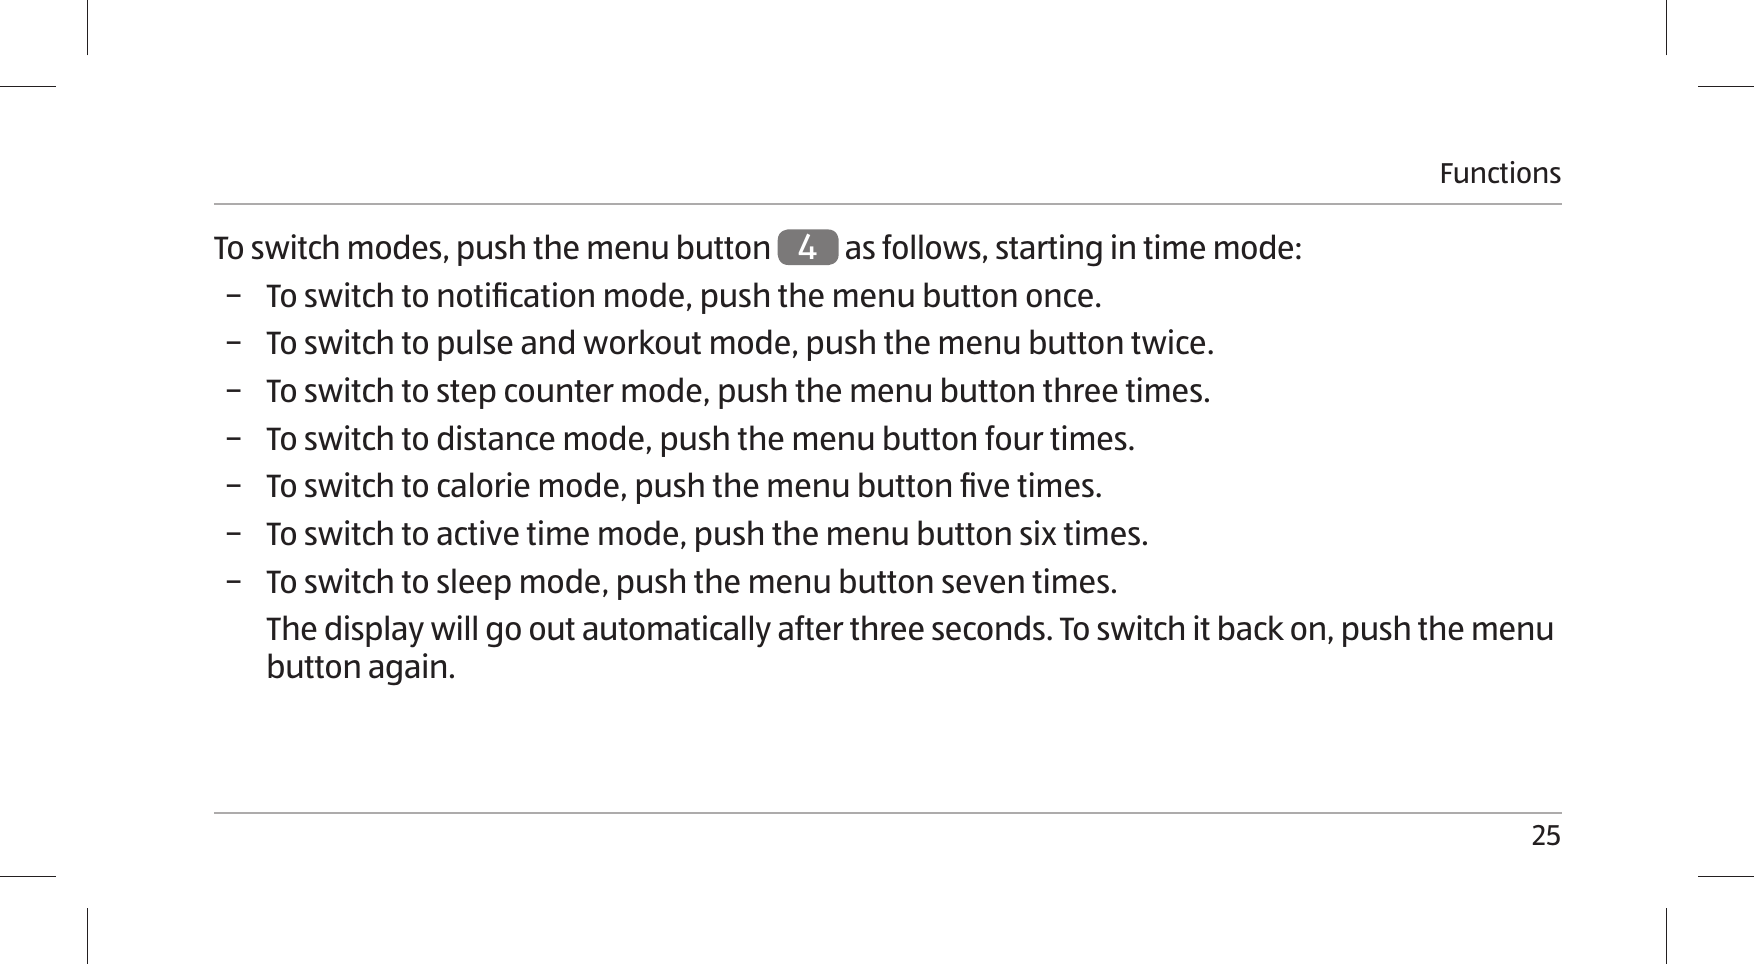 Functions25To switch modes, push the menu button 4 as follows, starting in time mode: − To switch to notiﬁcation mode, push the menu button once.  − To switch to pulse and workout mode, push the menu button twice.  − To switch to step counter mode, push the menu button three times.  − To switch to distance mode, push the menu button four times.  − To switch to calorie mode, push the menu button ﬁve times.  − To switch to active time mode, push the menu button six times.  − To switch to sleep mode, push the menu button seven times.The display will go out automatically after three seconds. To switch it back on, push the menu button again. 